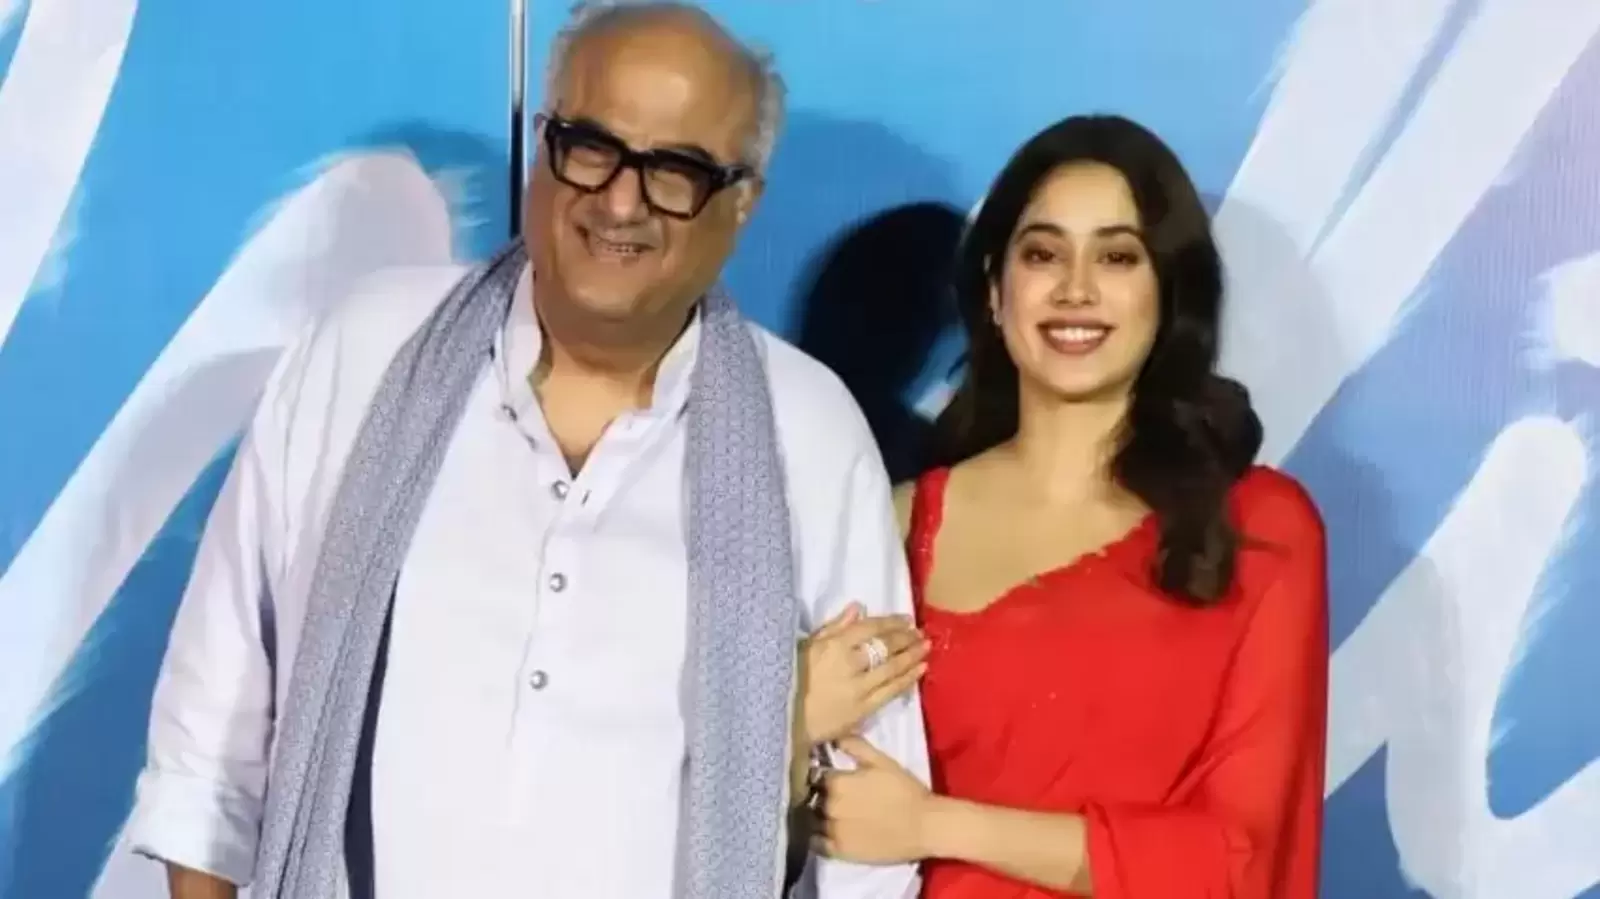 Janhvi Kapoor hasn’t signed any Tamil film, Boney Kapoor issues statement; requests media ‘to not spread false rumours’